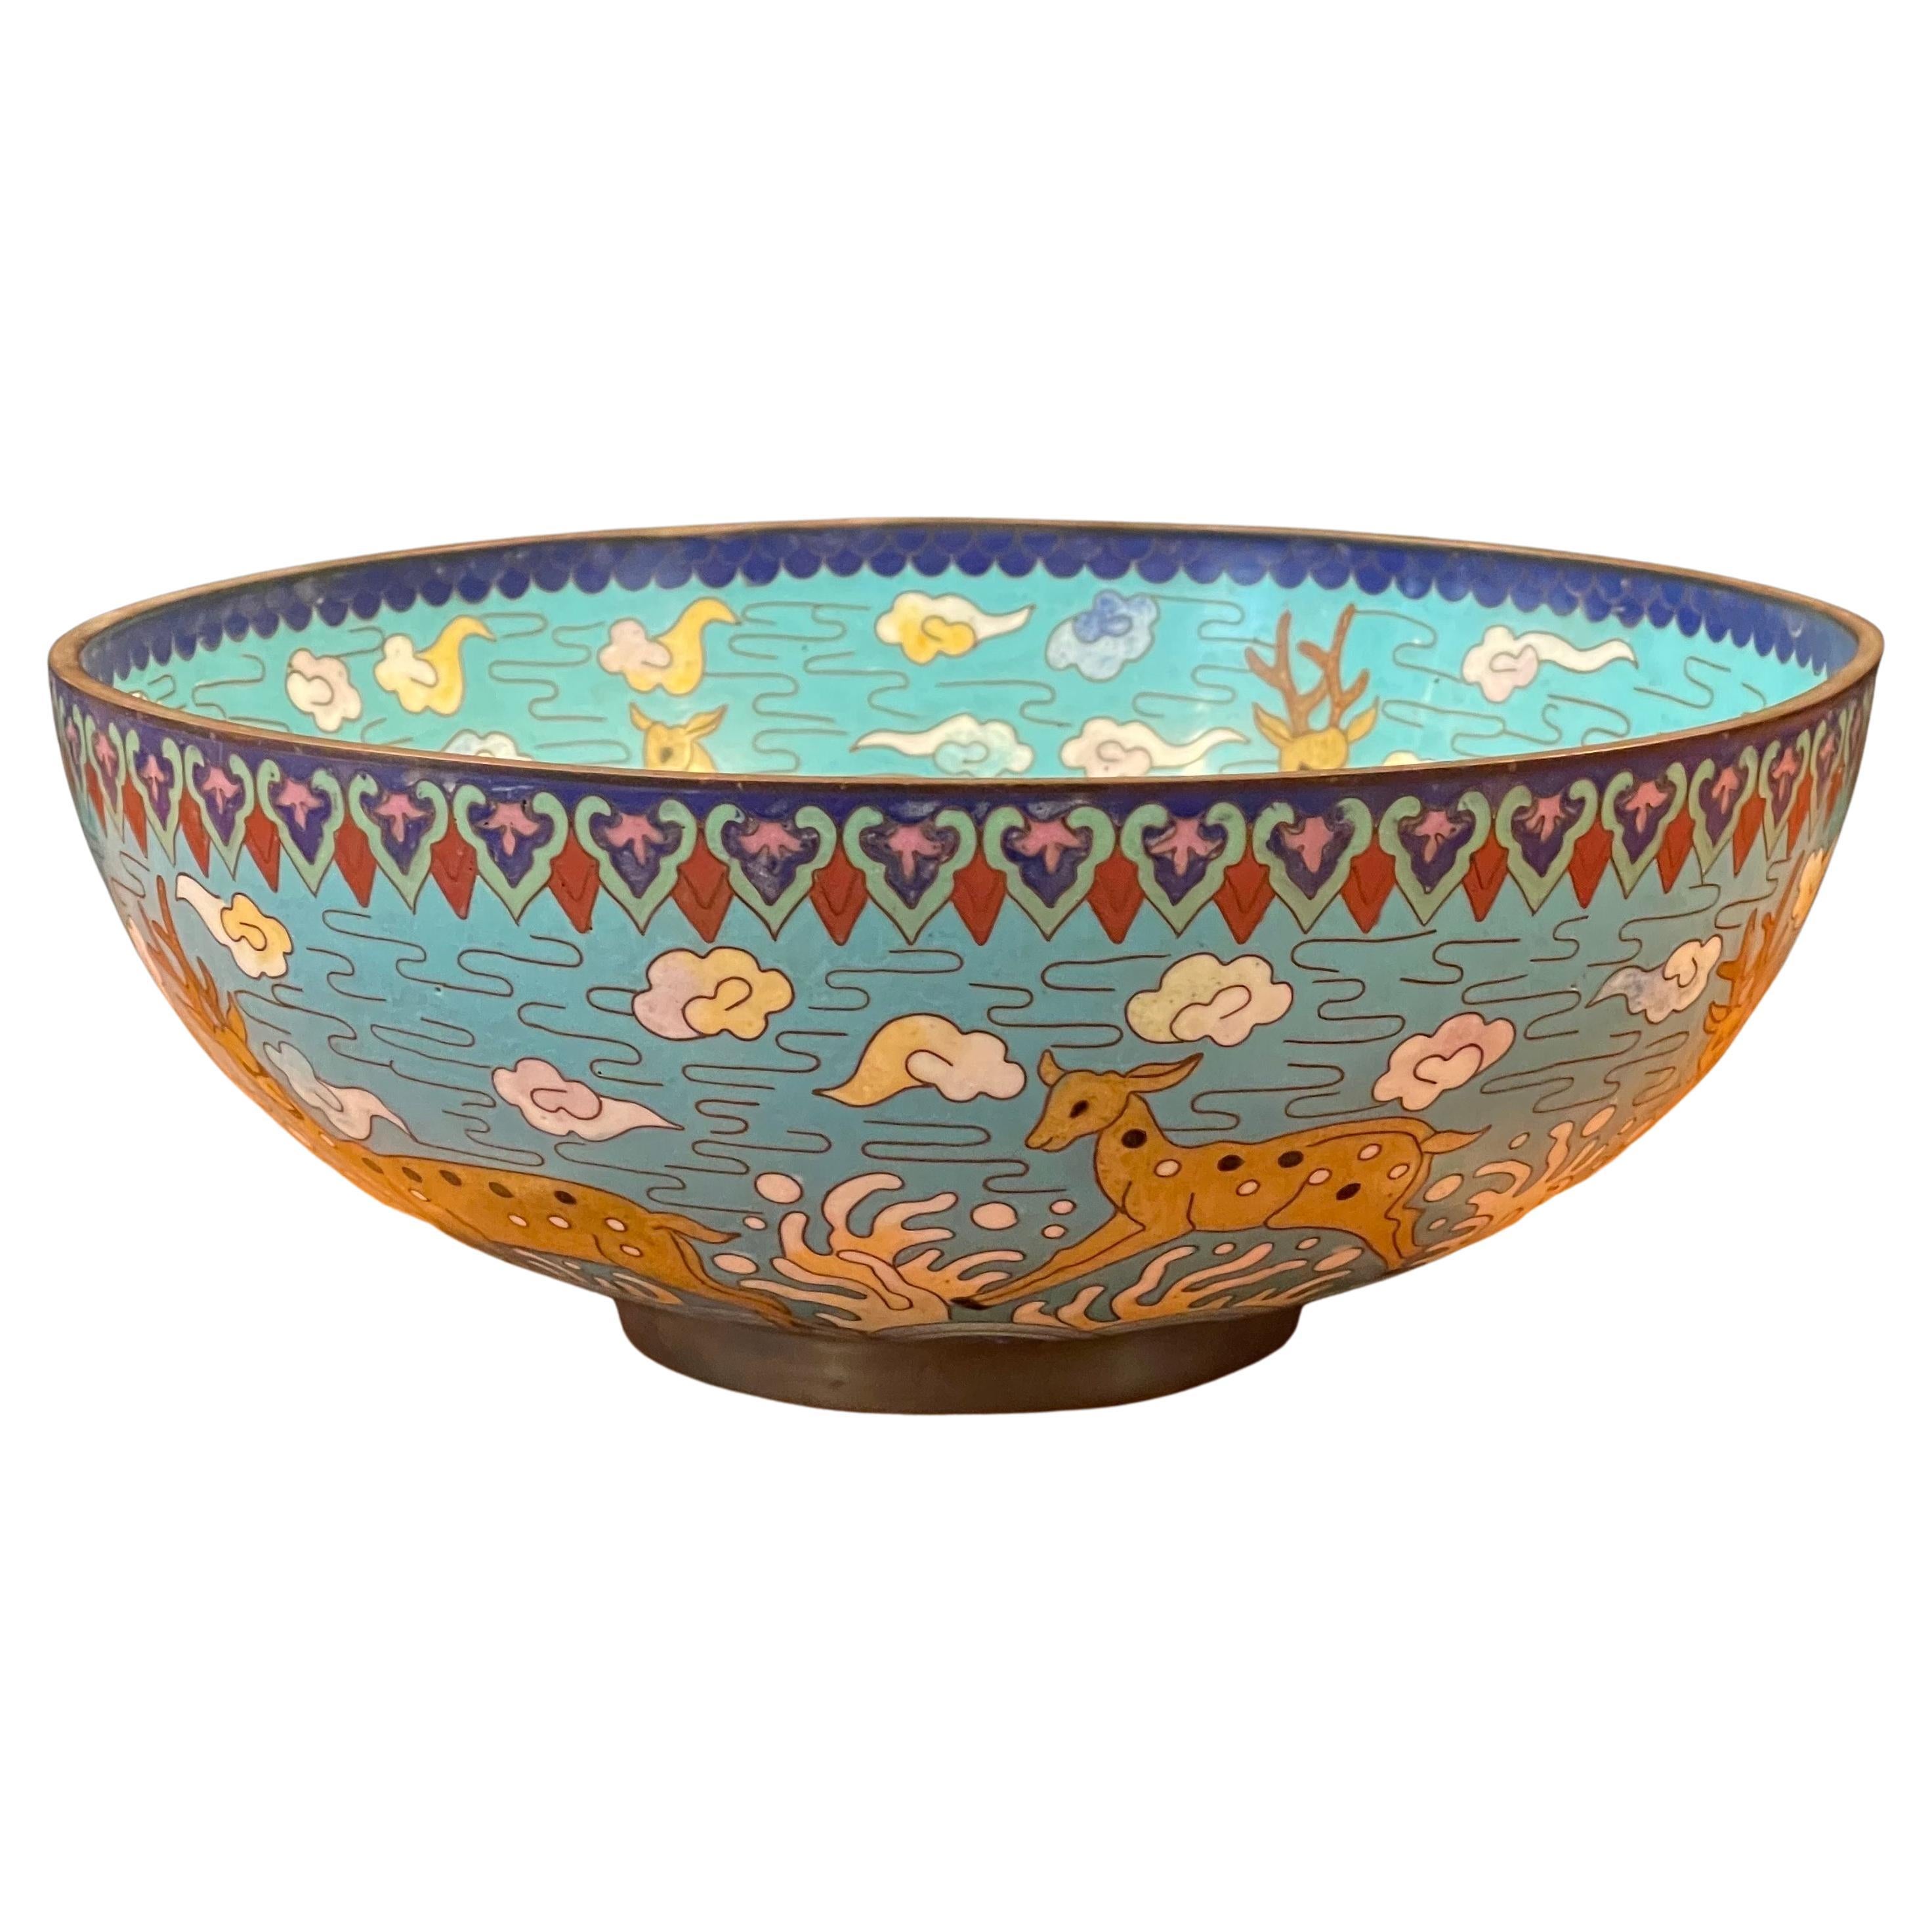 Chinoiserie Vintage Chinese Cloisonné Bowl with Deer and Koi Motif For Sale